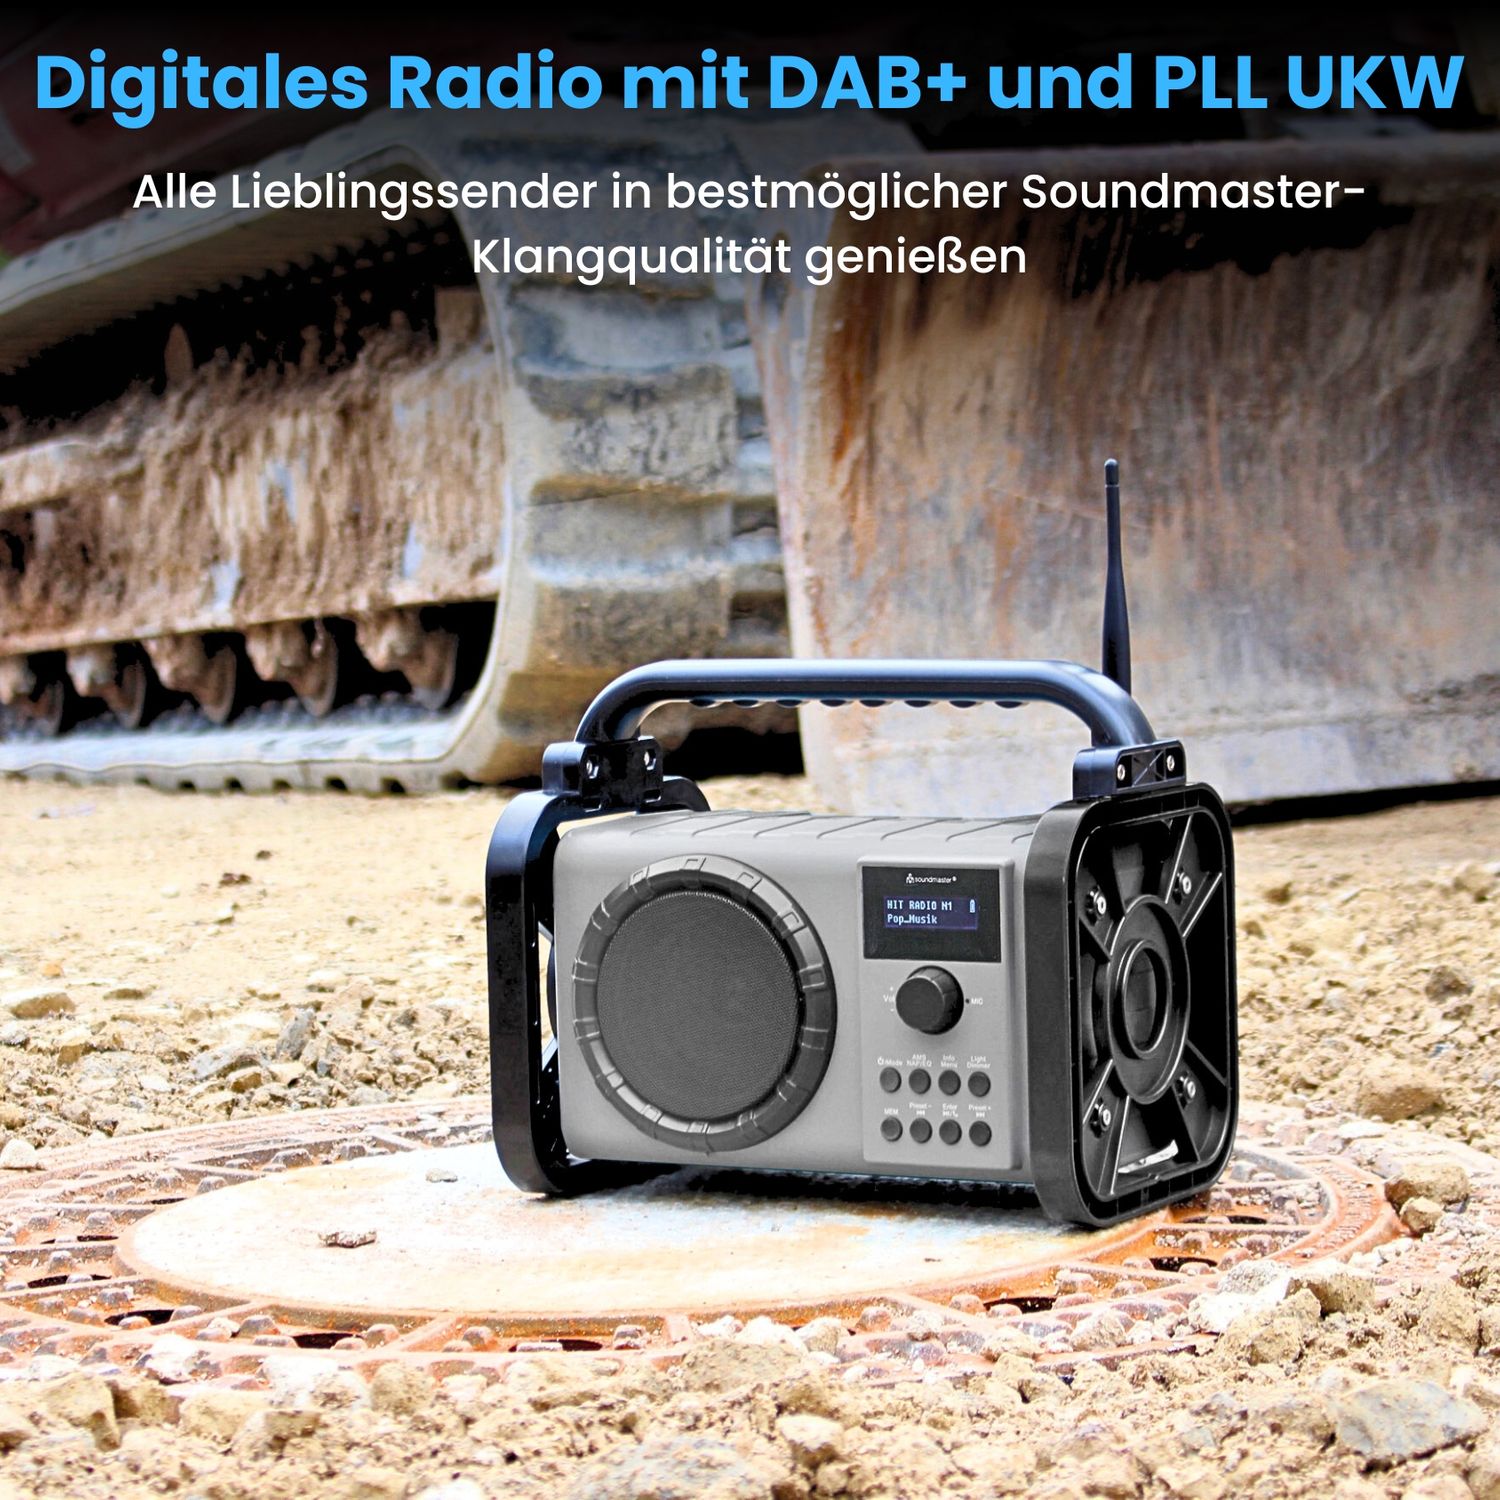 Soundmaster DAB80SW construction site radio with DAB+ FM Bluetooth and Li-Ion battery IP44 dust and splash-proof